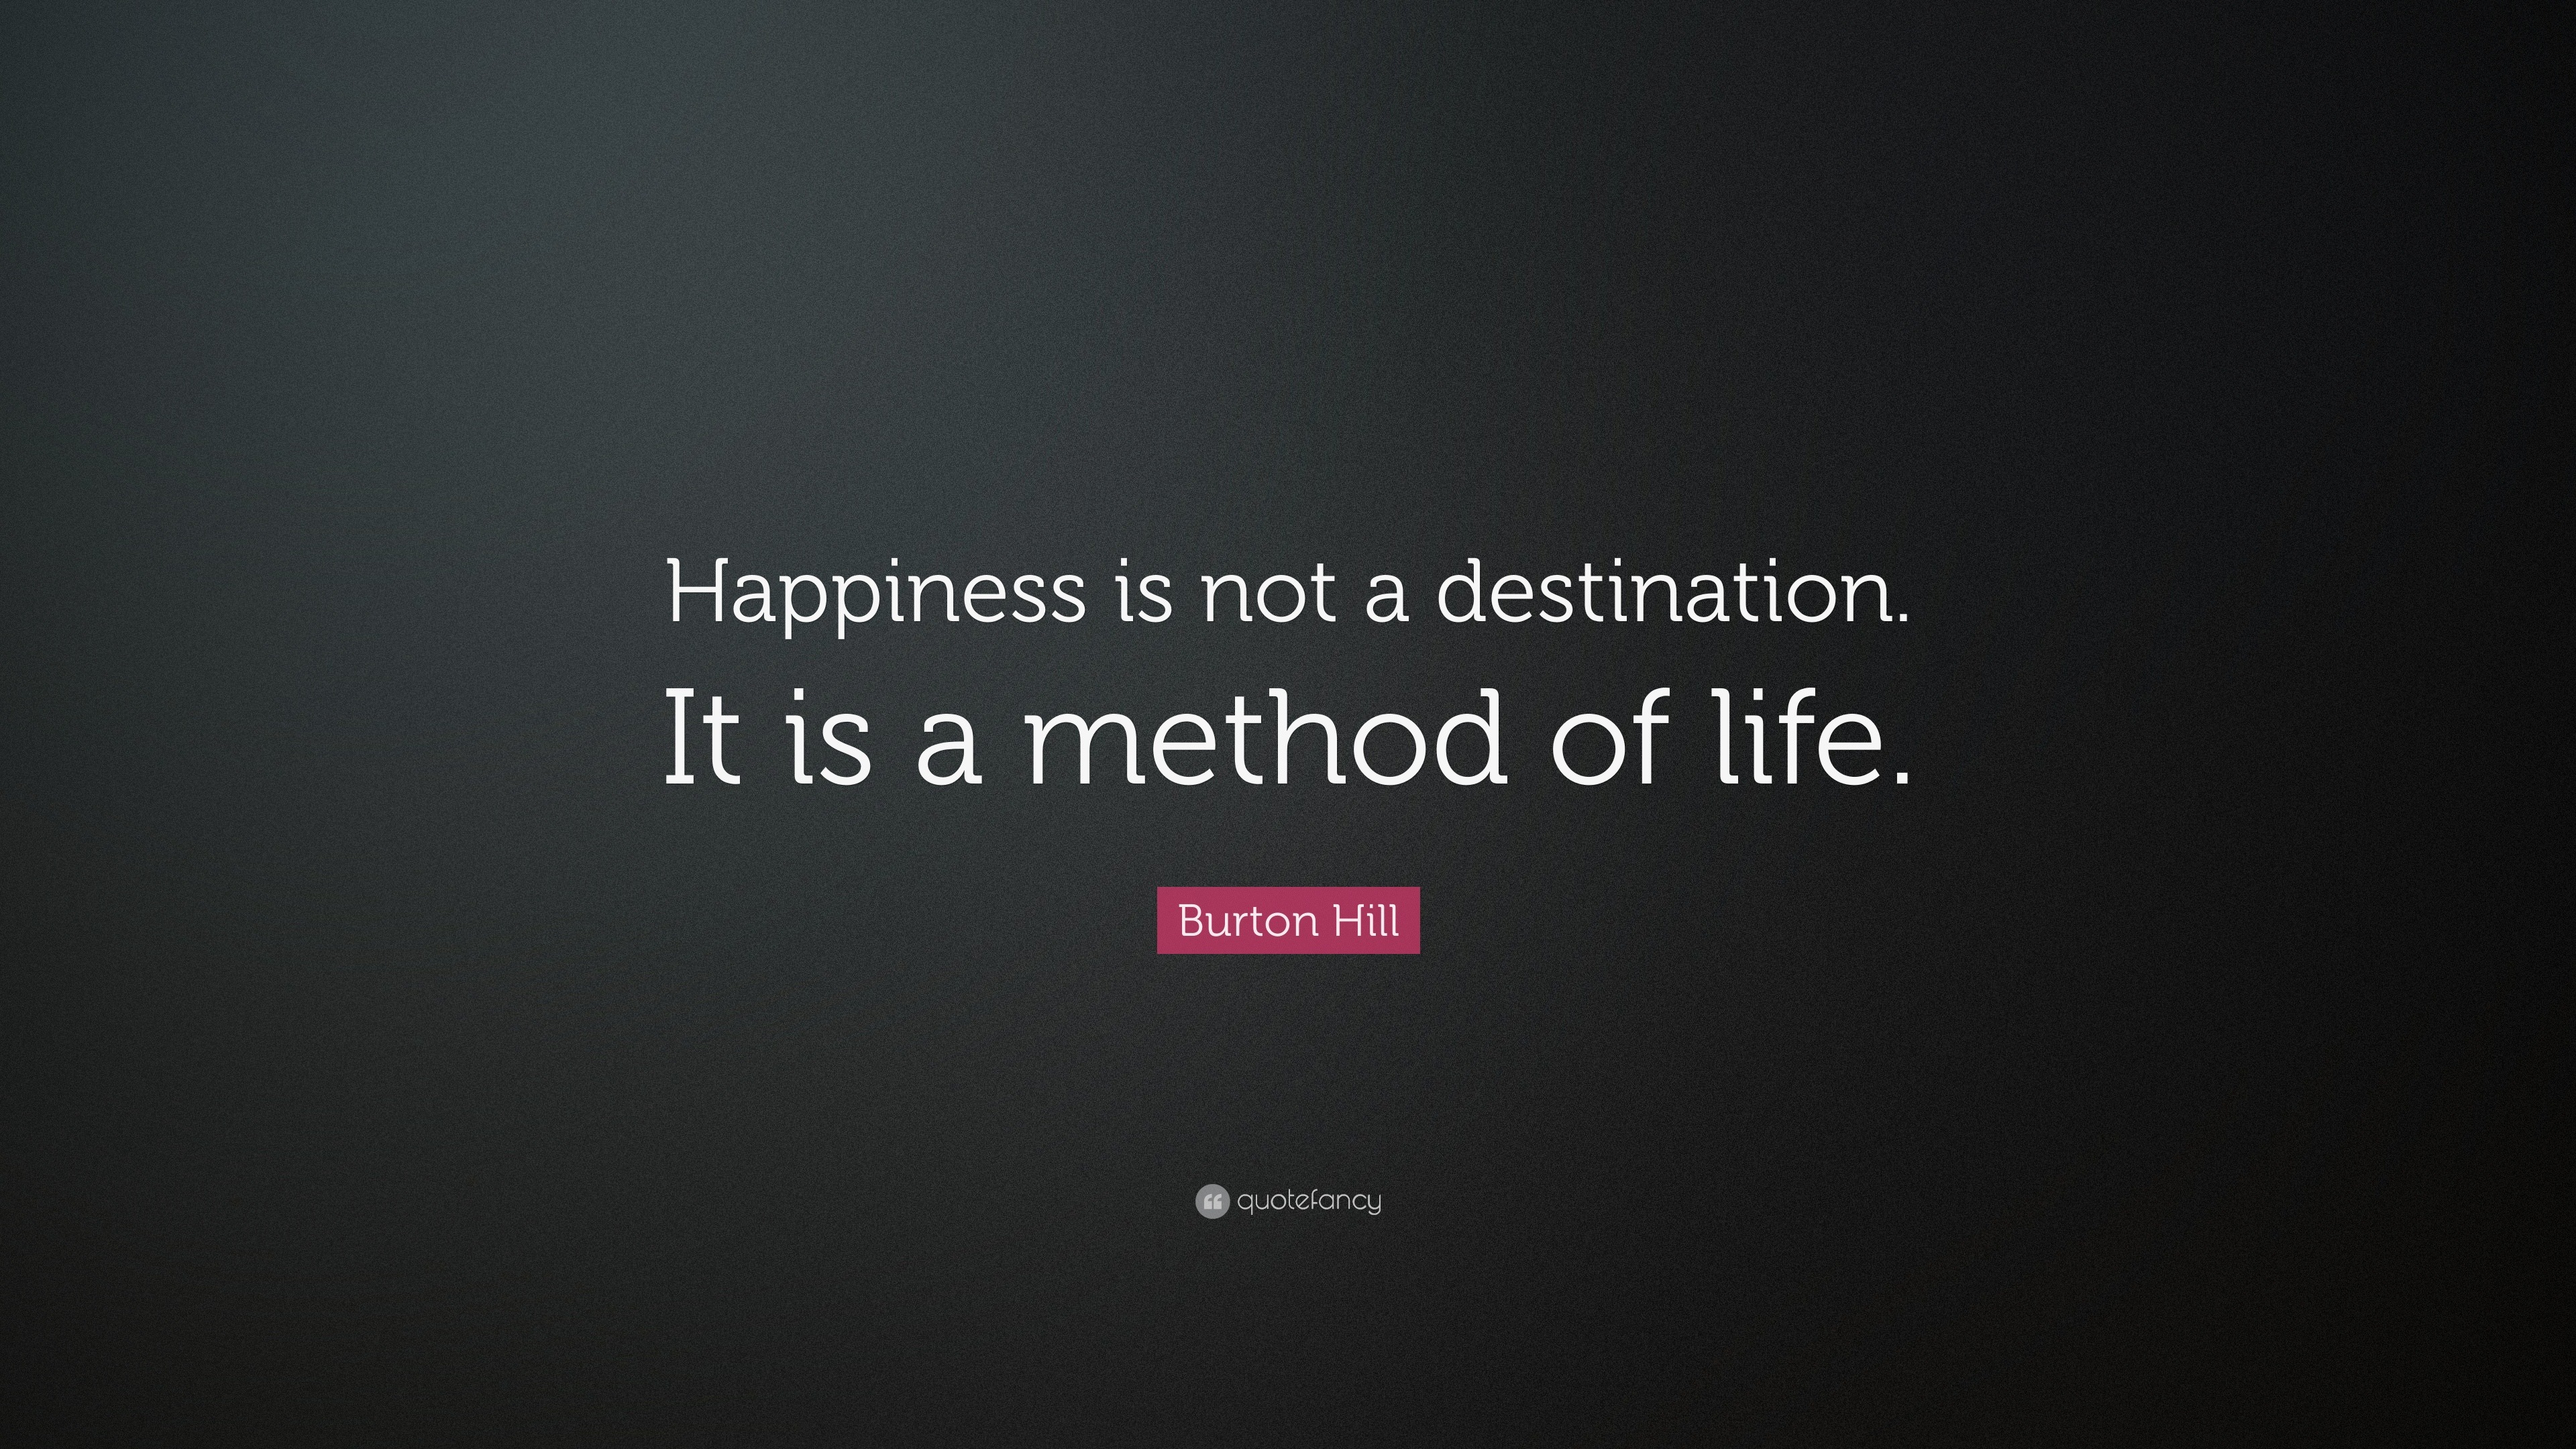 Burton Hill Quote: “Happiness is not a destination. It is a method of ...